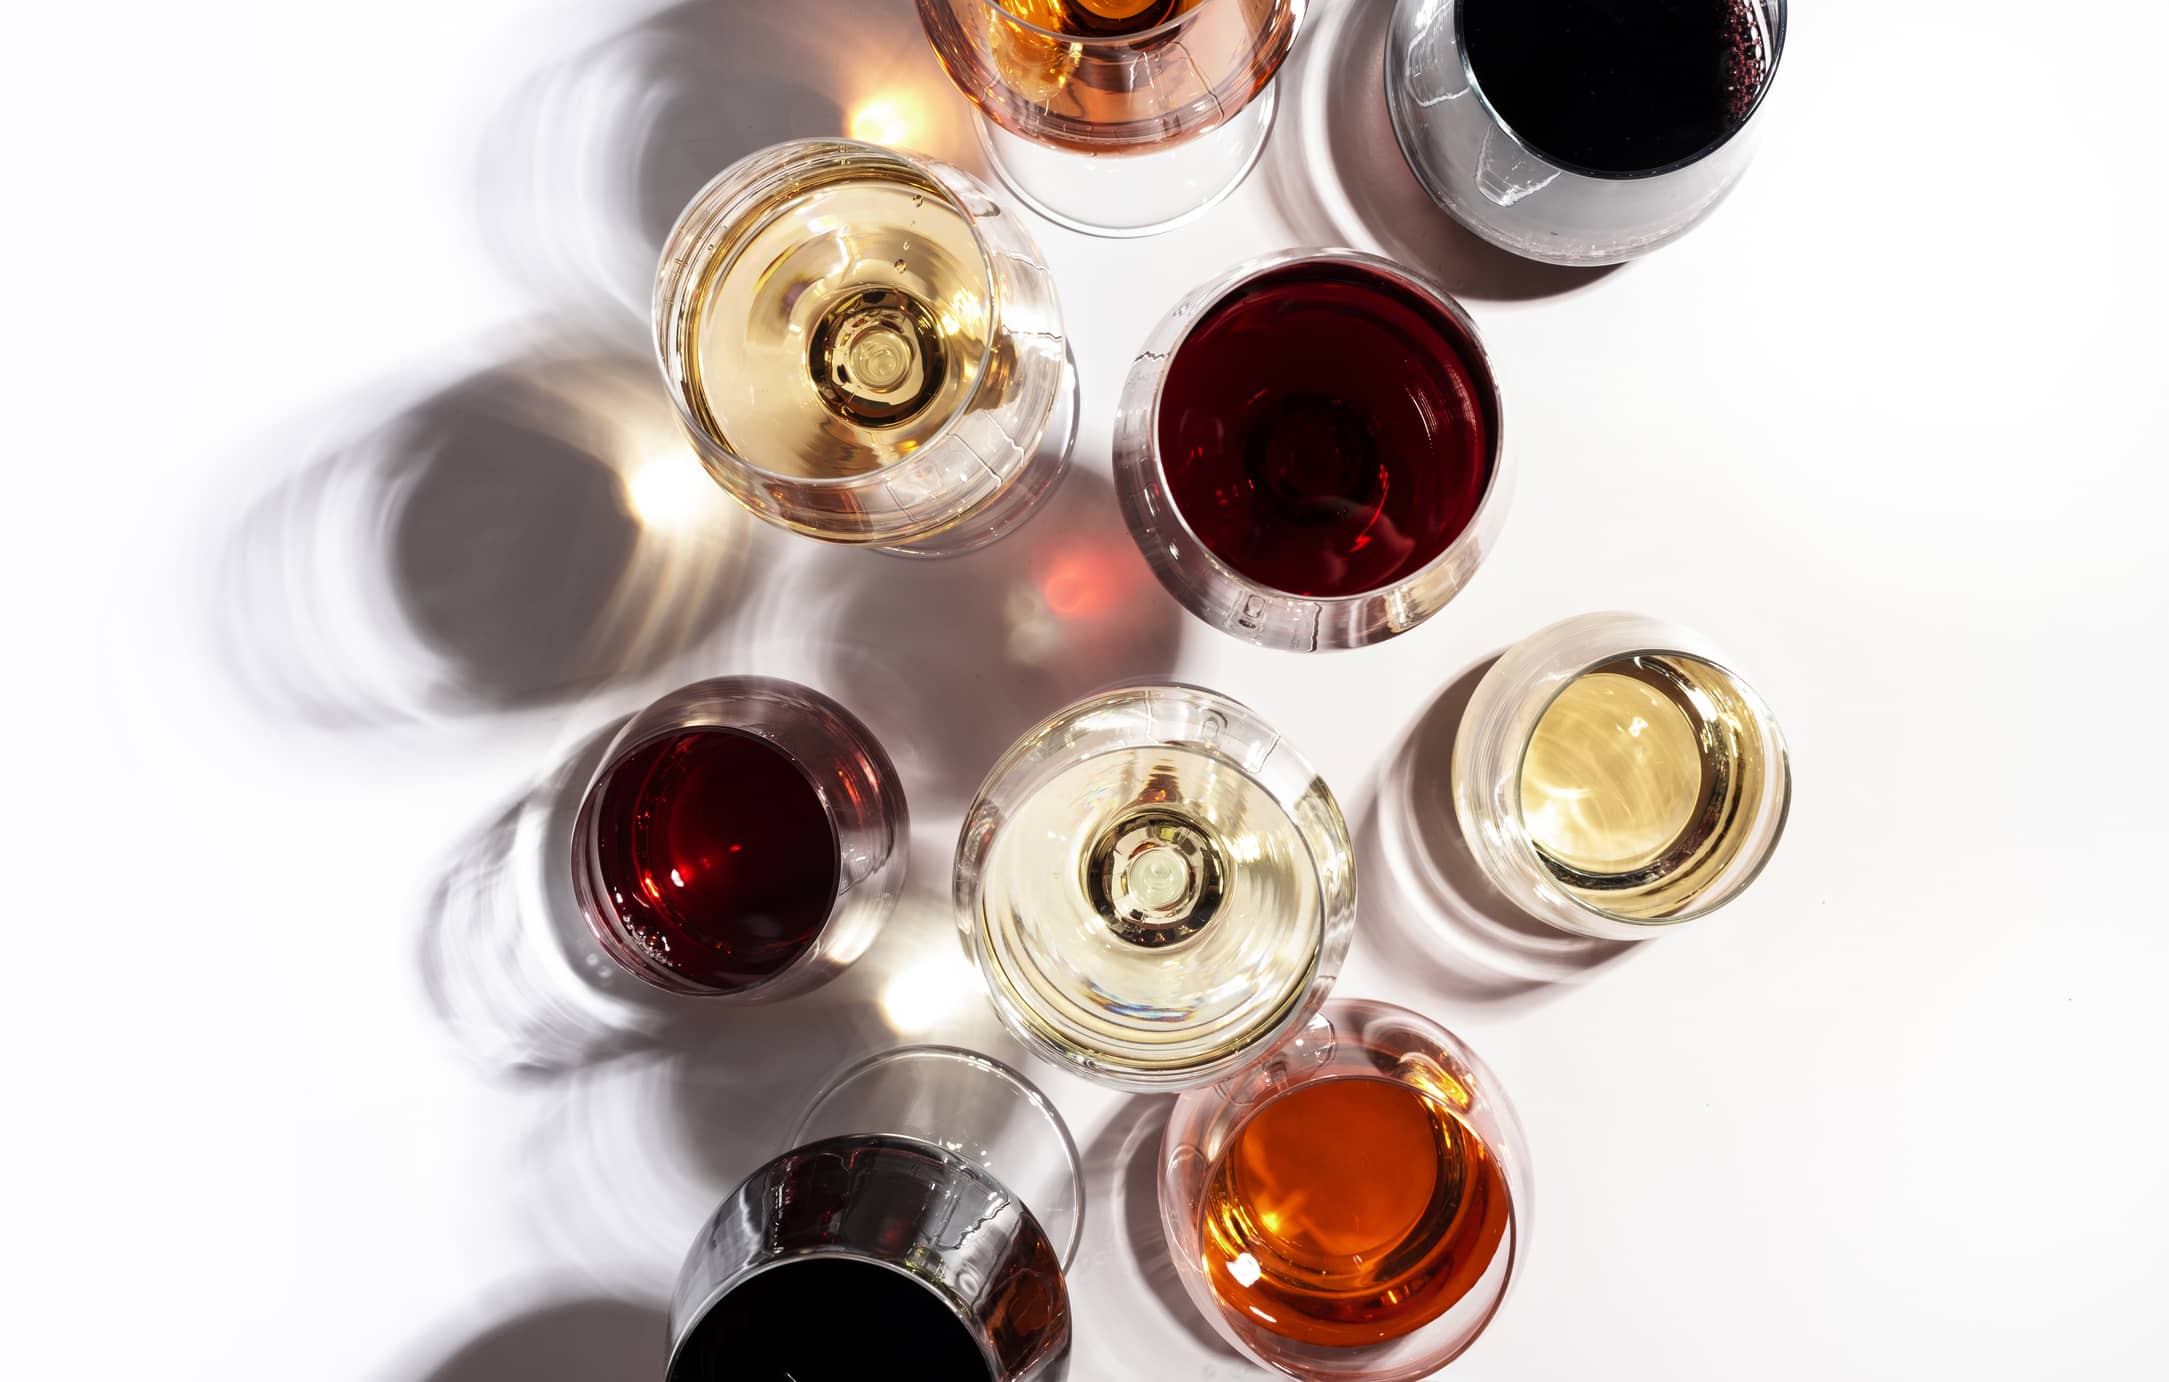 red-rose-and-white-wine-in-glasses-on-white-background-top-view-wine-bar-shop-winery-wine-tasting-concept-hard-light-and-harsh-shadows